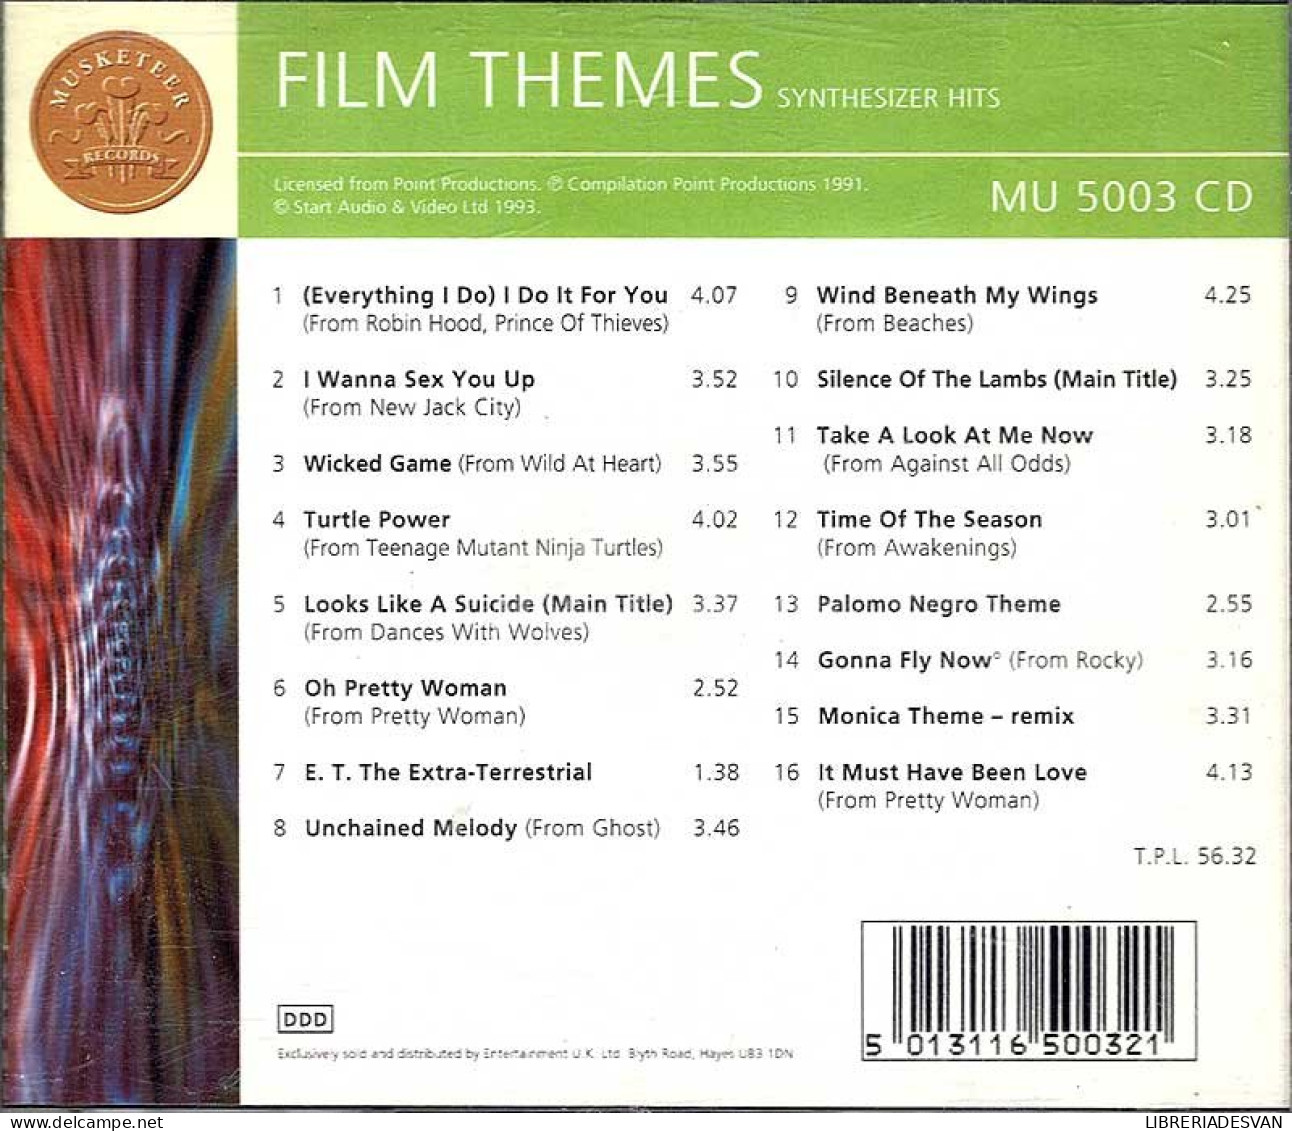 The London Studio Orchestra, The Hollywood Studio Orchestra - Film Themes Synthesizer Hits. CD - Musique De Films